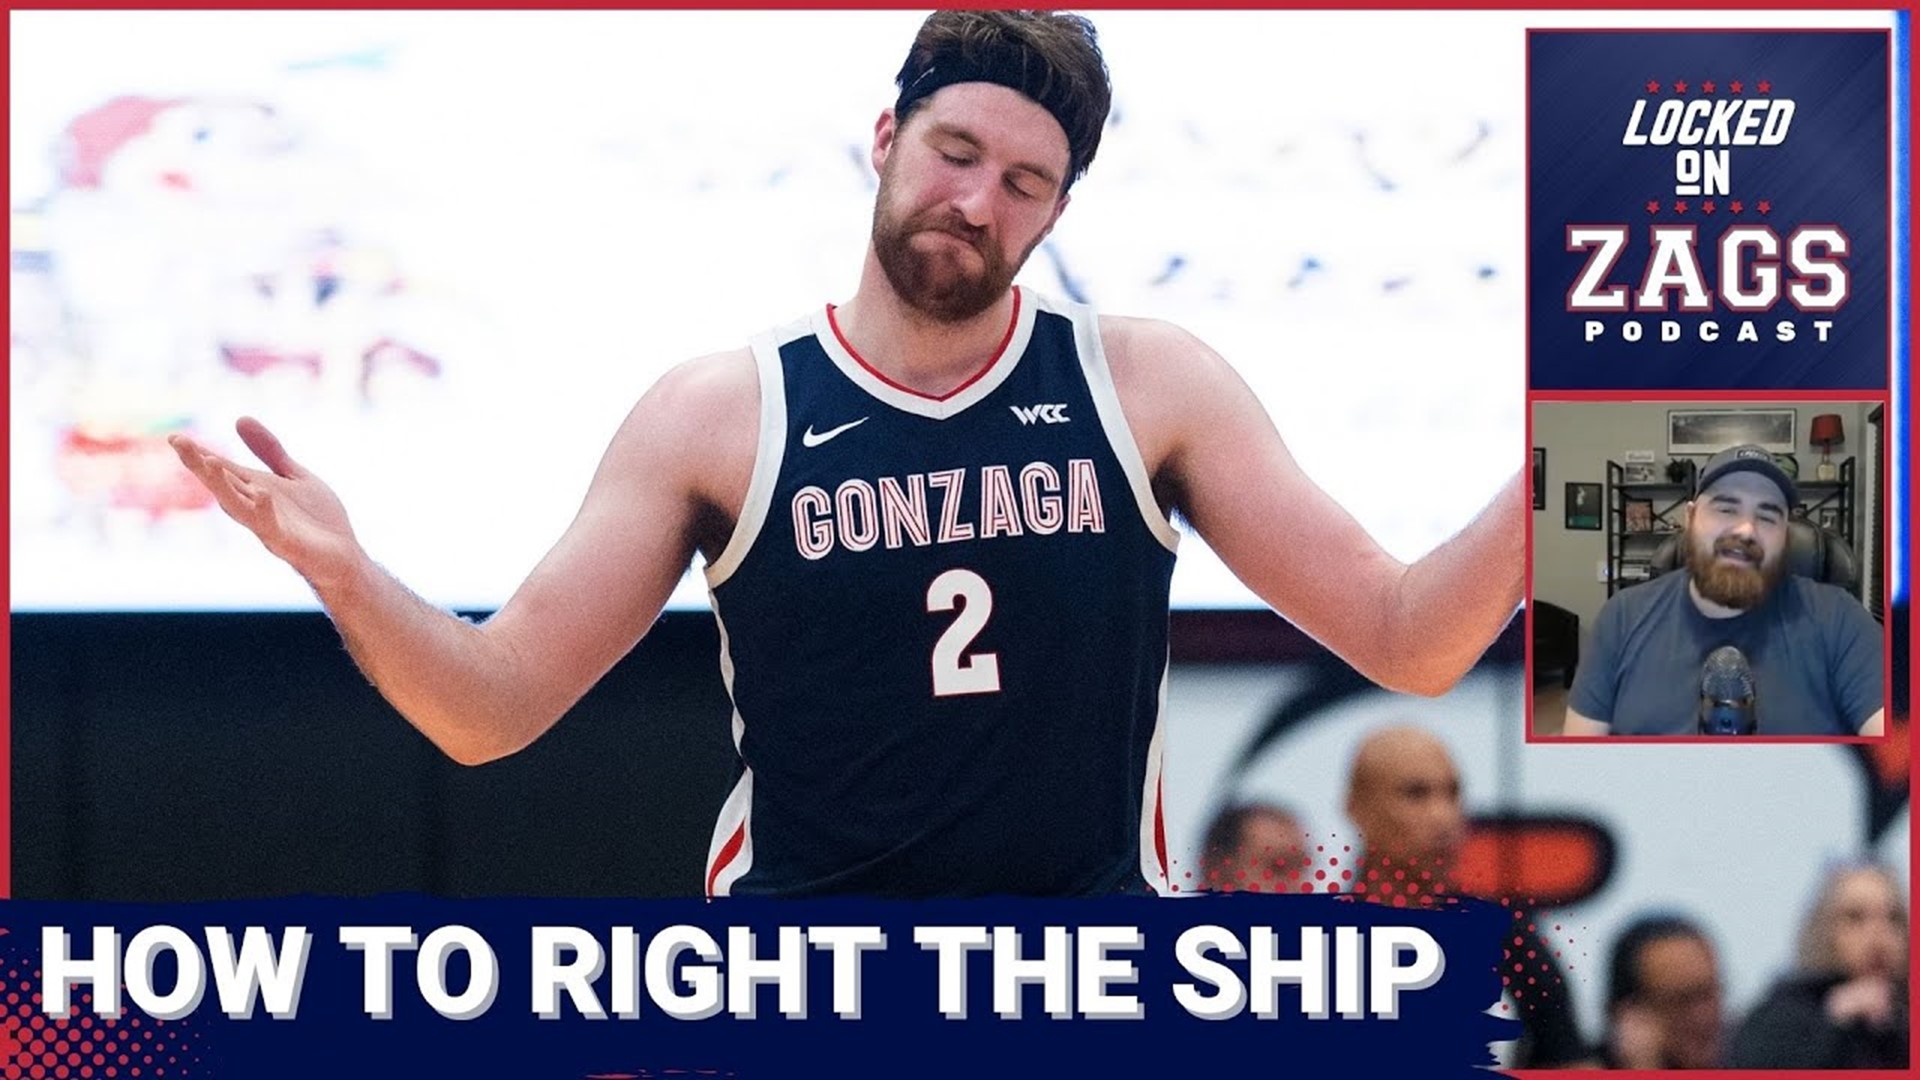 The Gonzaga Bulldogs defeated the Pacific Tigers on the road thanks to a career-high 38 points from Drew Timme, who rebounded from an awful game against LMU.